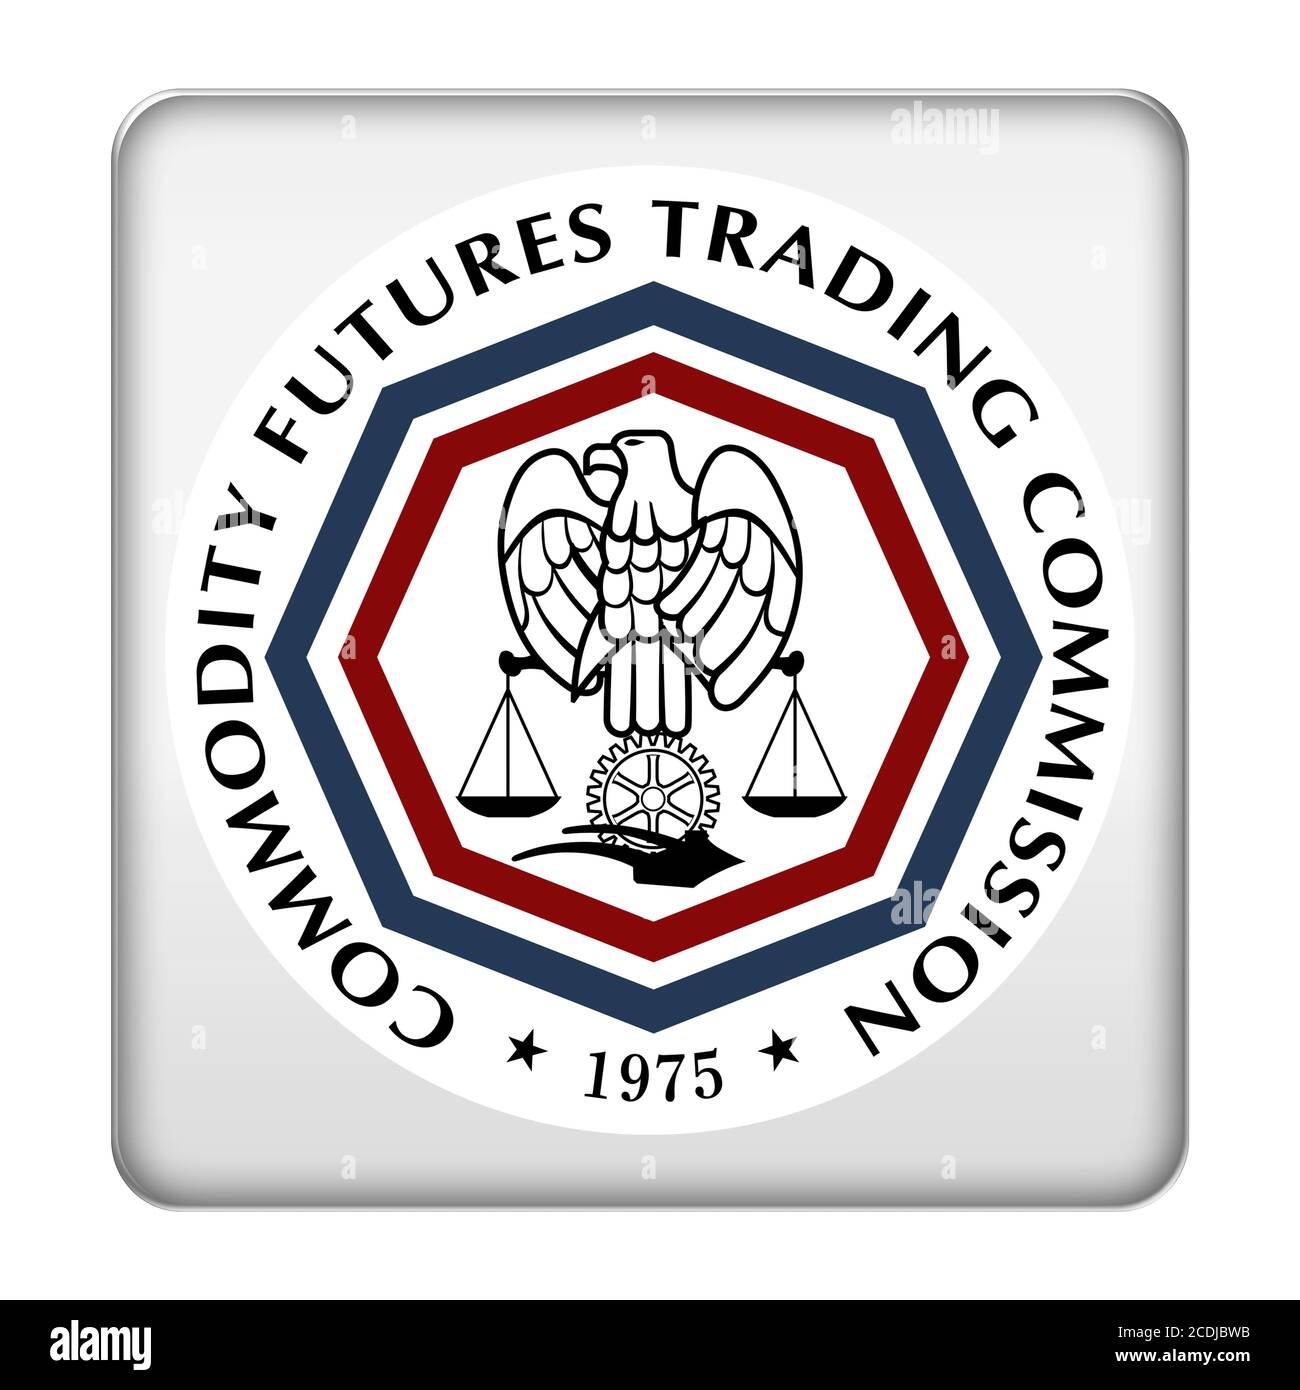 Commodity Futures Trading Commission CFTC Stockfoto